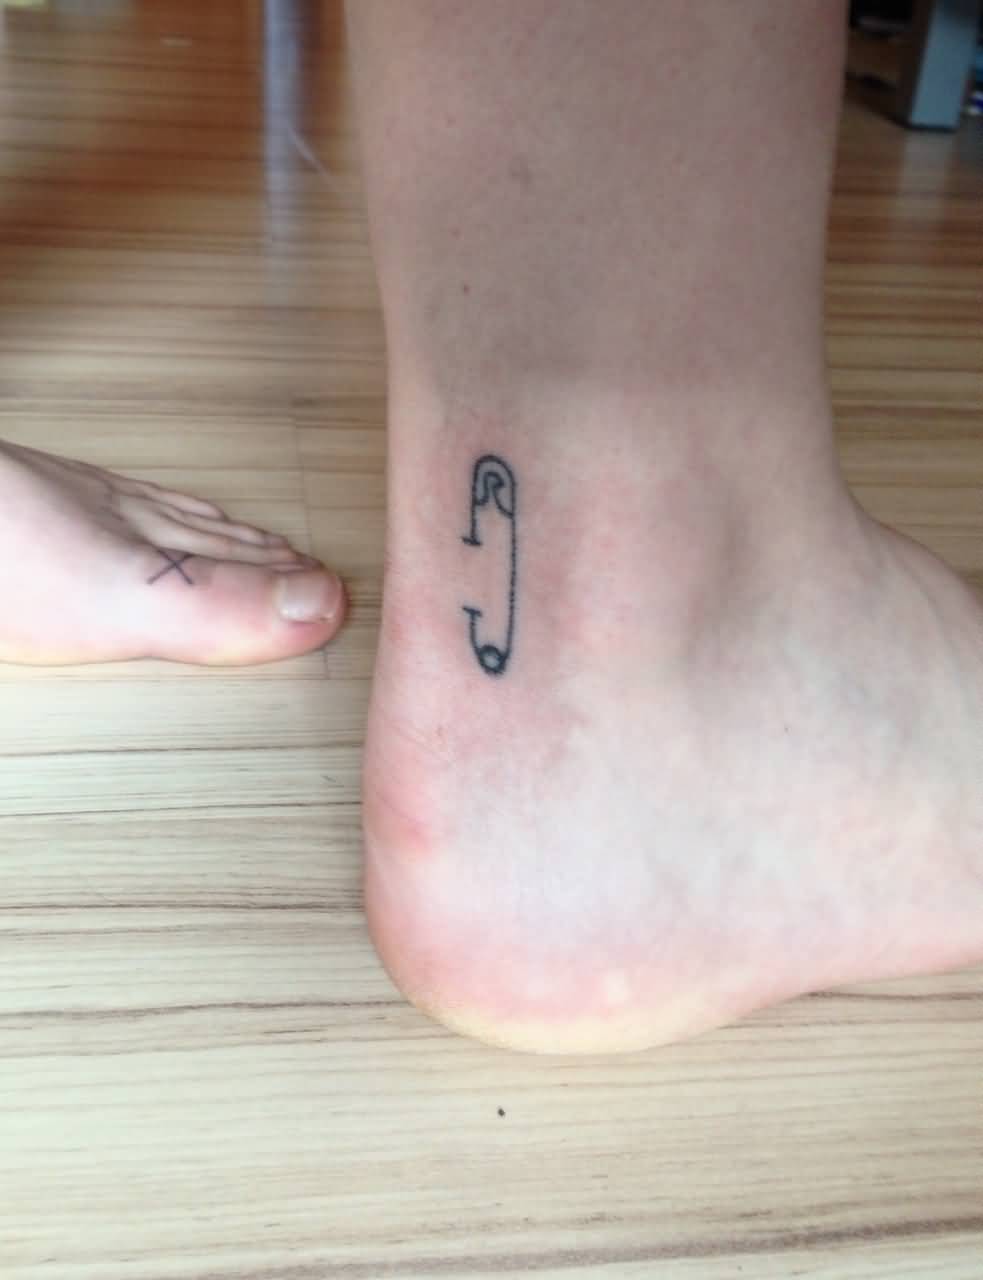 Read Complete Simple Safety Pin Tattoo On Ankle